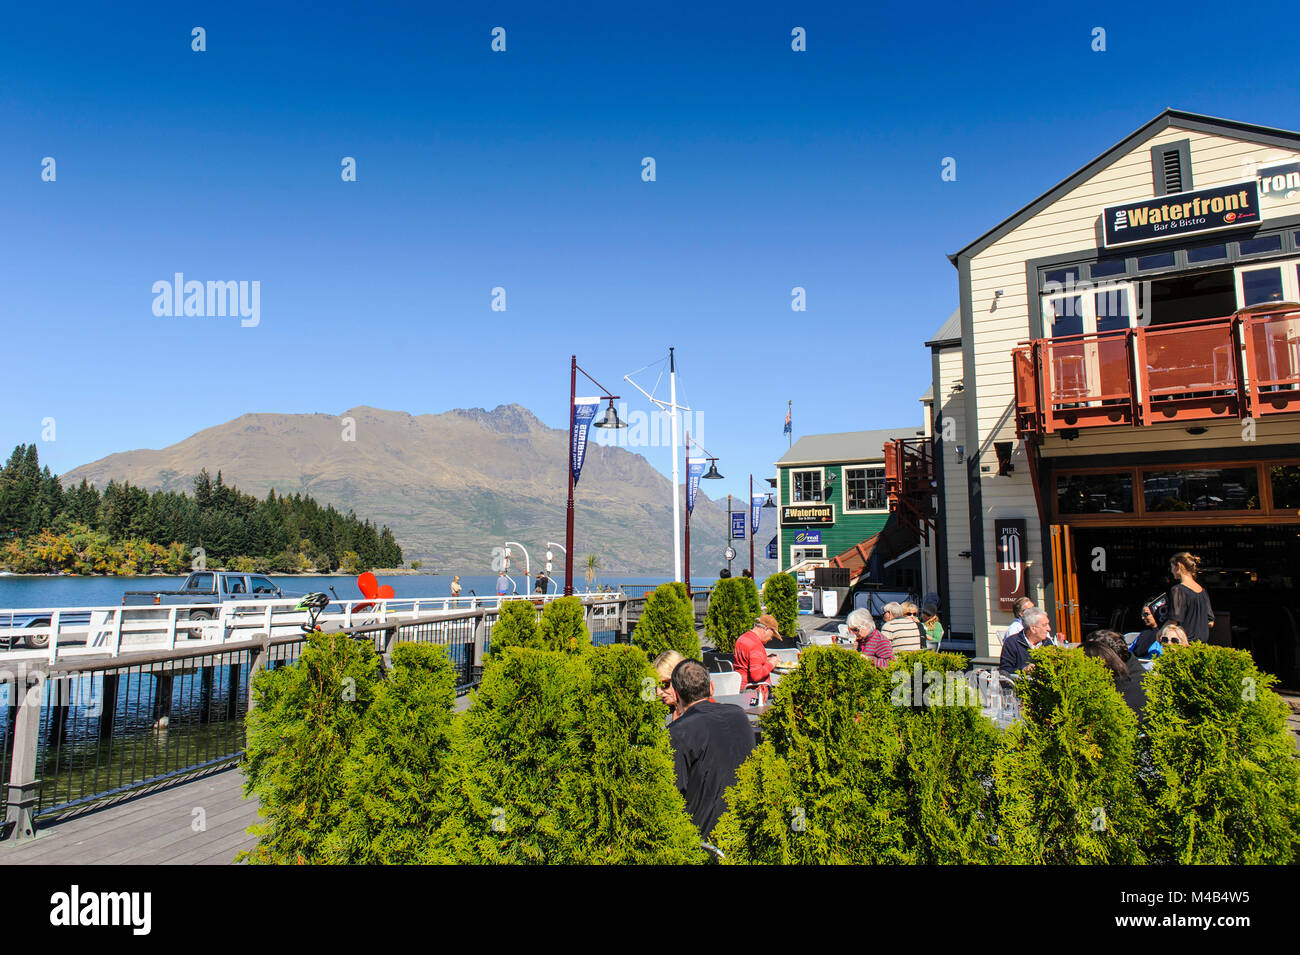 Open air cafe on the shore of lake wakatipu,Queenstown,South Island,New Zealand Stock Photo